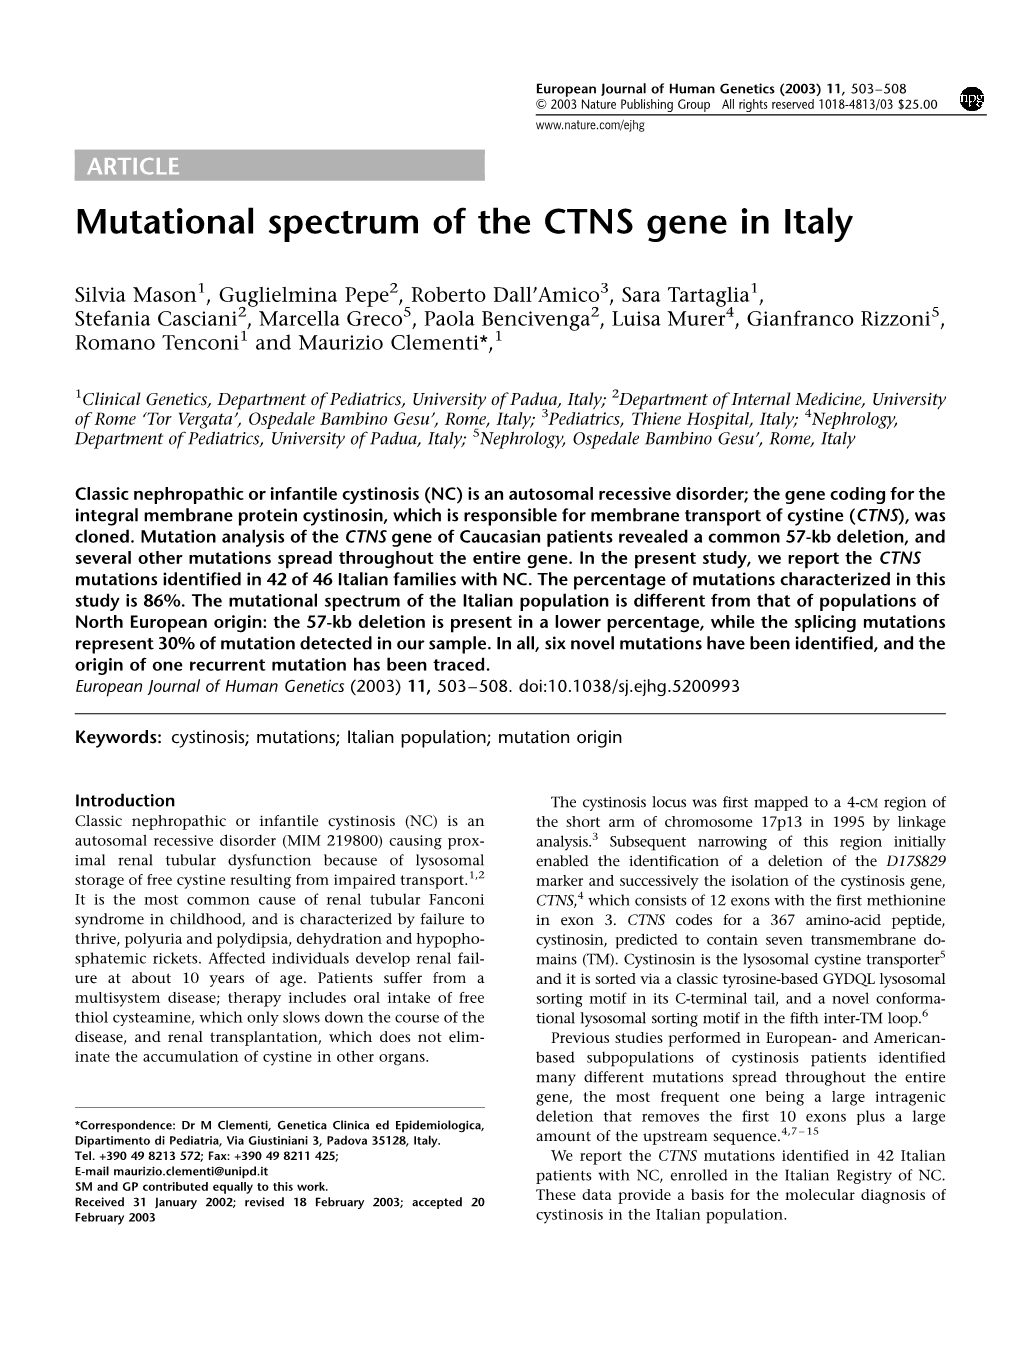 Mutational Spectrum of the CTNS Gene in Italy